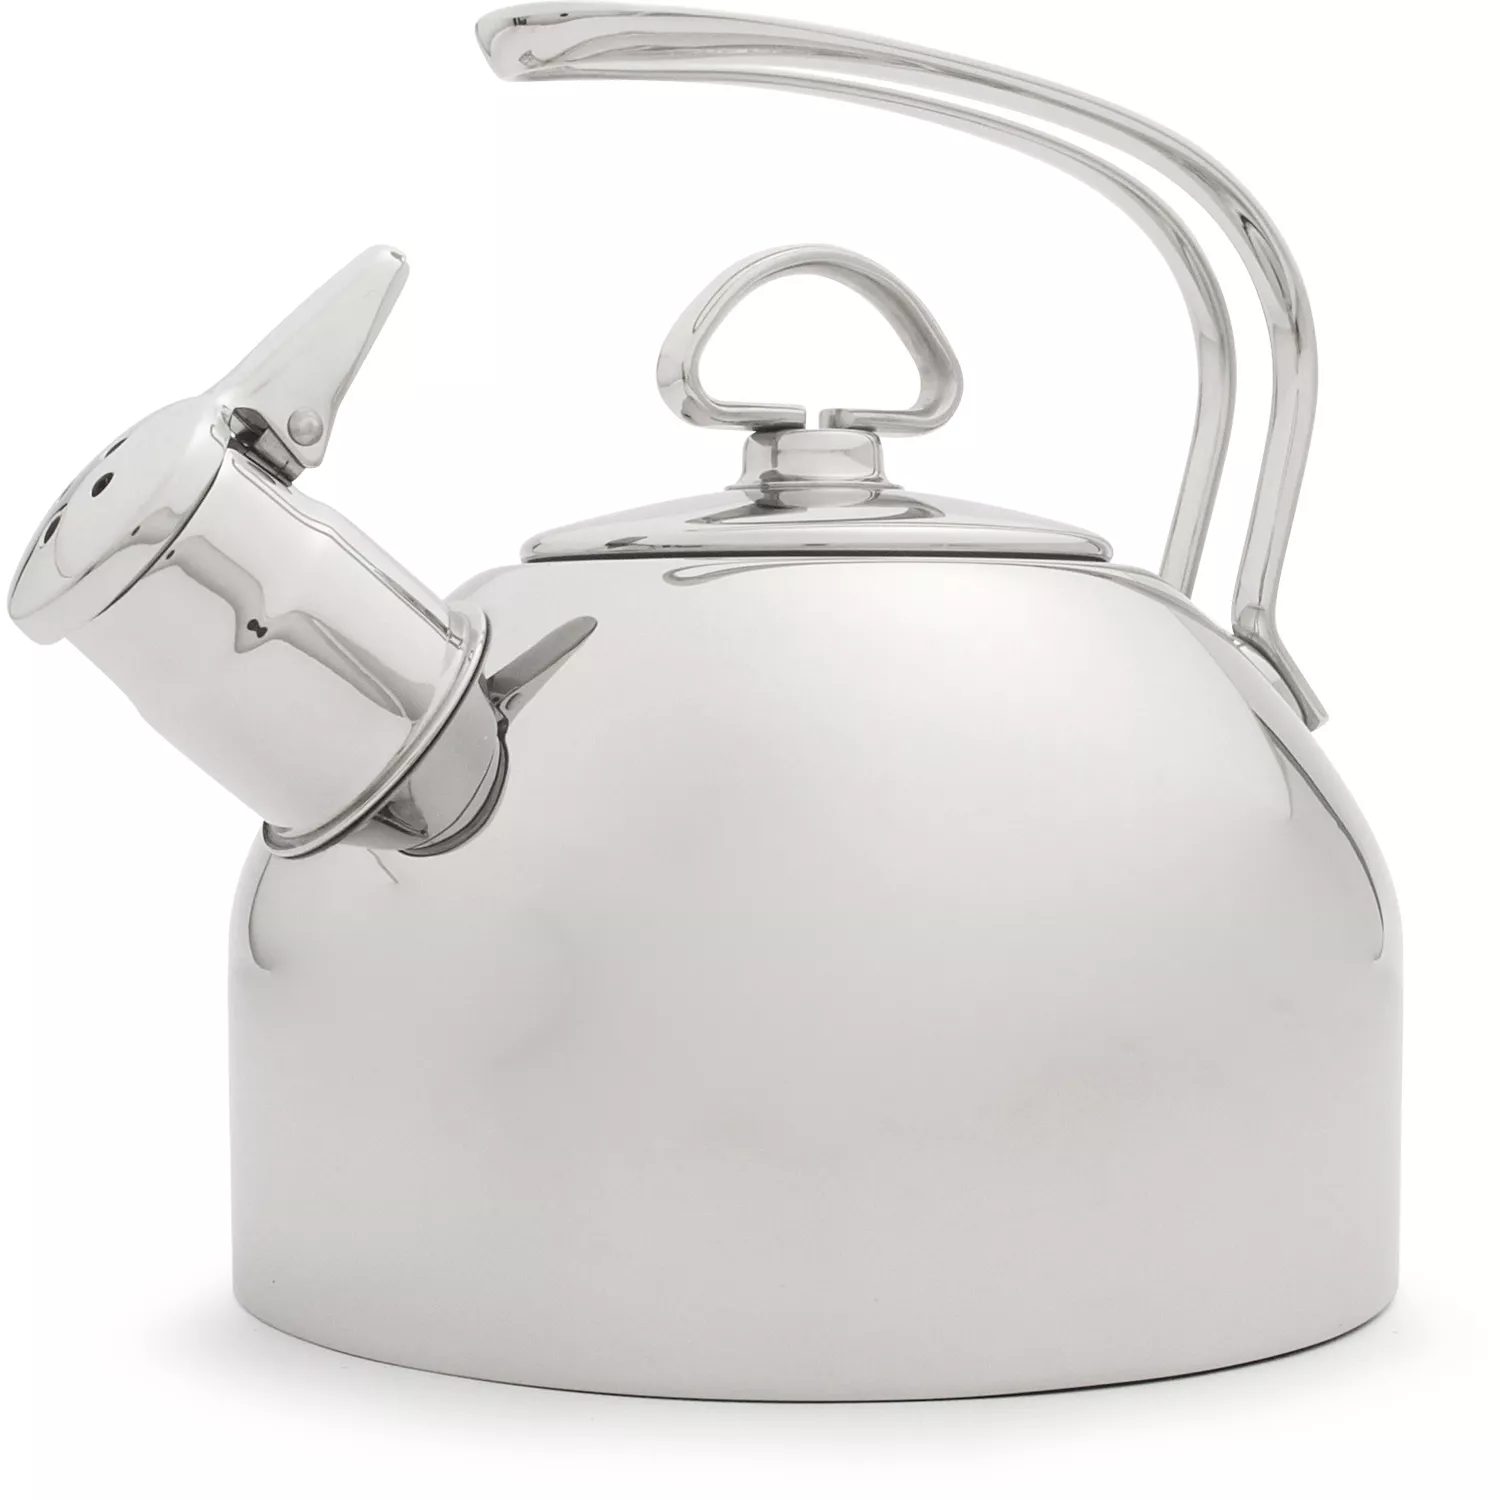 KitchenAid Stainless Steel Whistling Induction Teakettle - Brushed  Stainless Steel